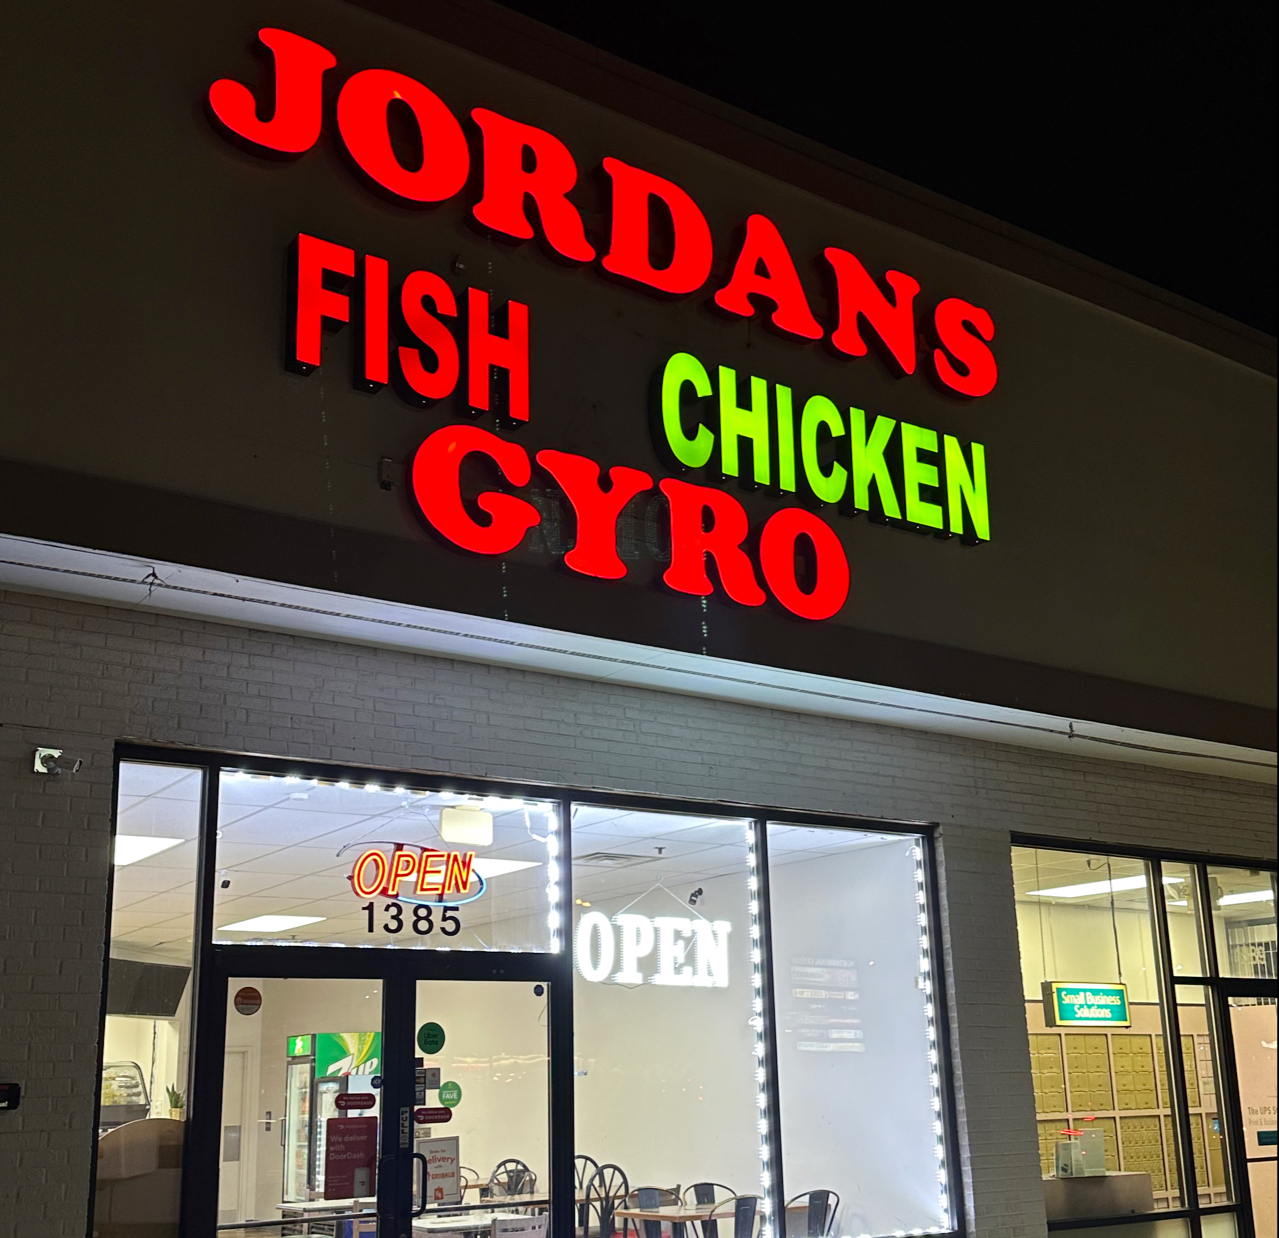 JORDANS FISH CHICKEN & GYROS (86TH ST AND DITCH)